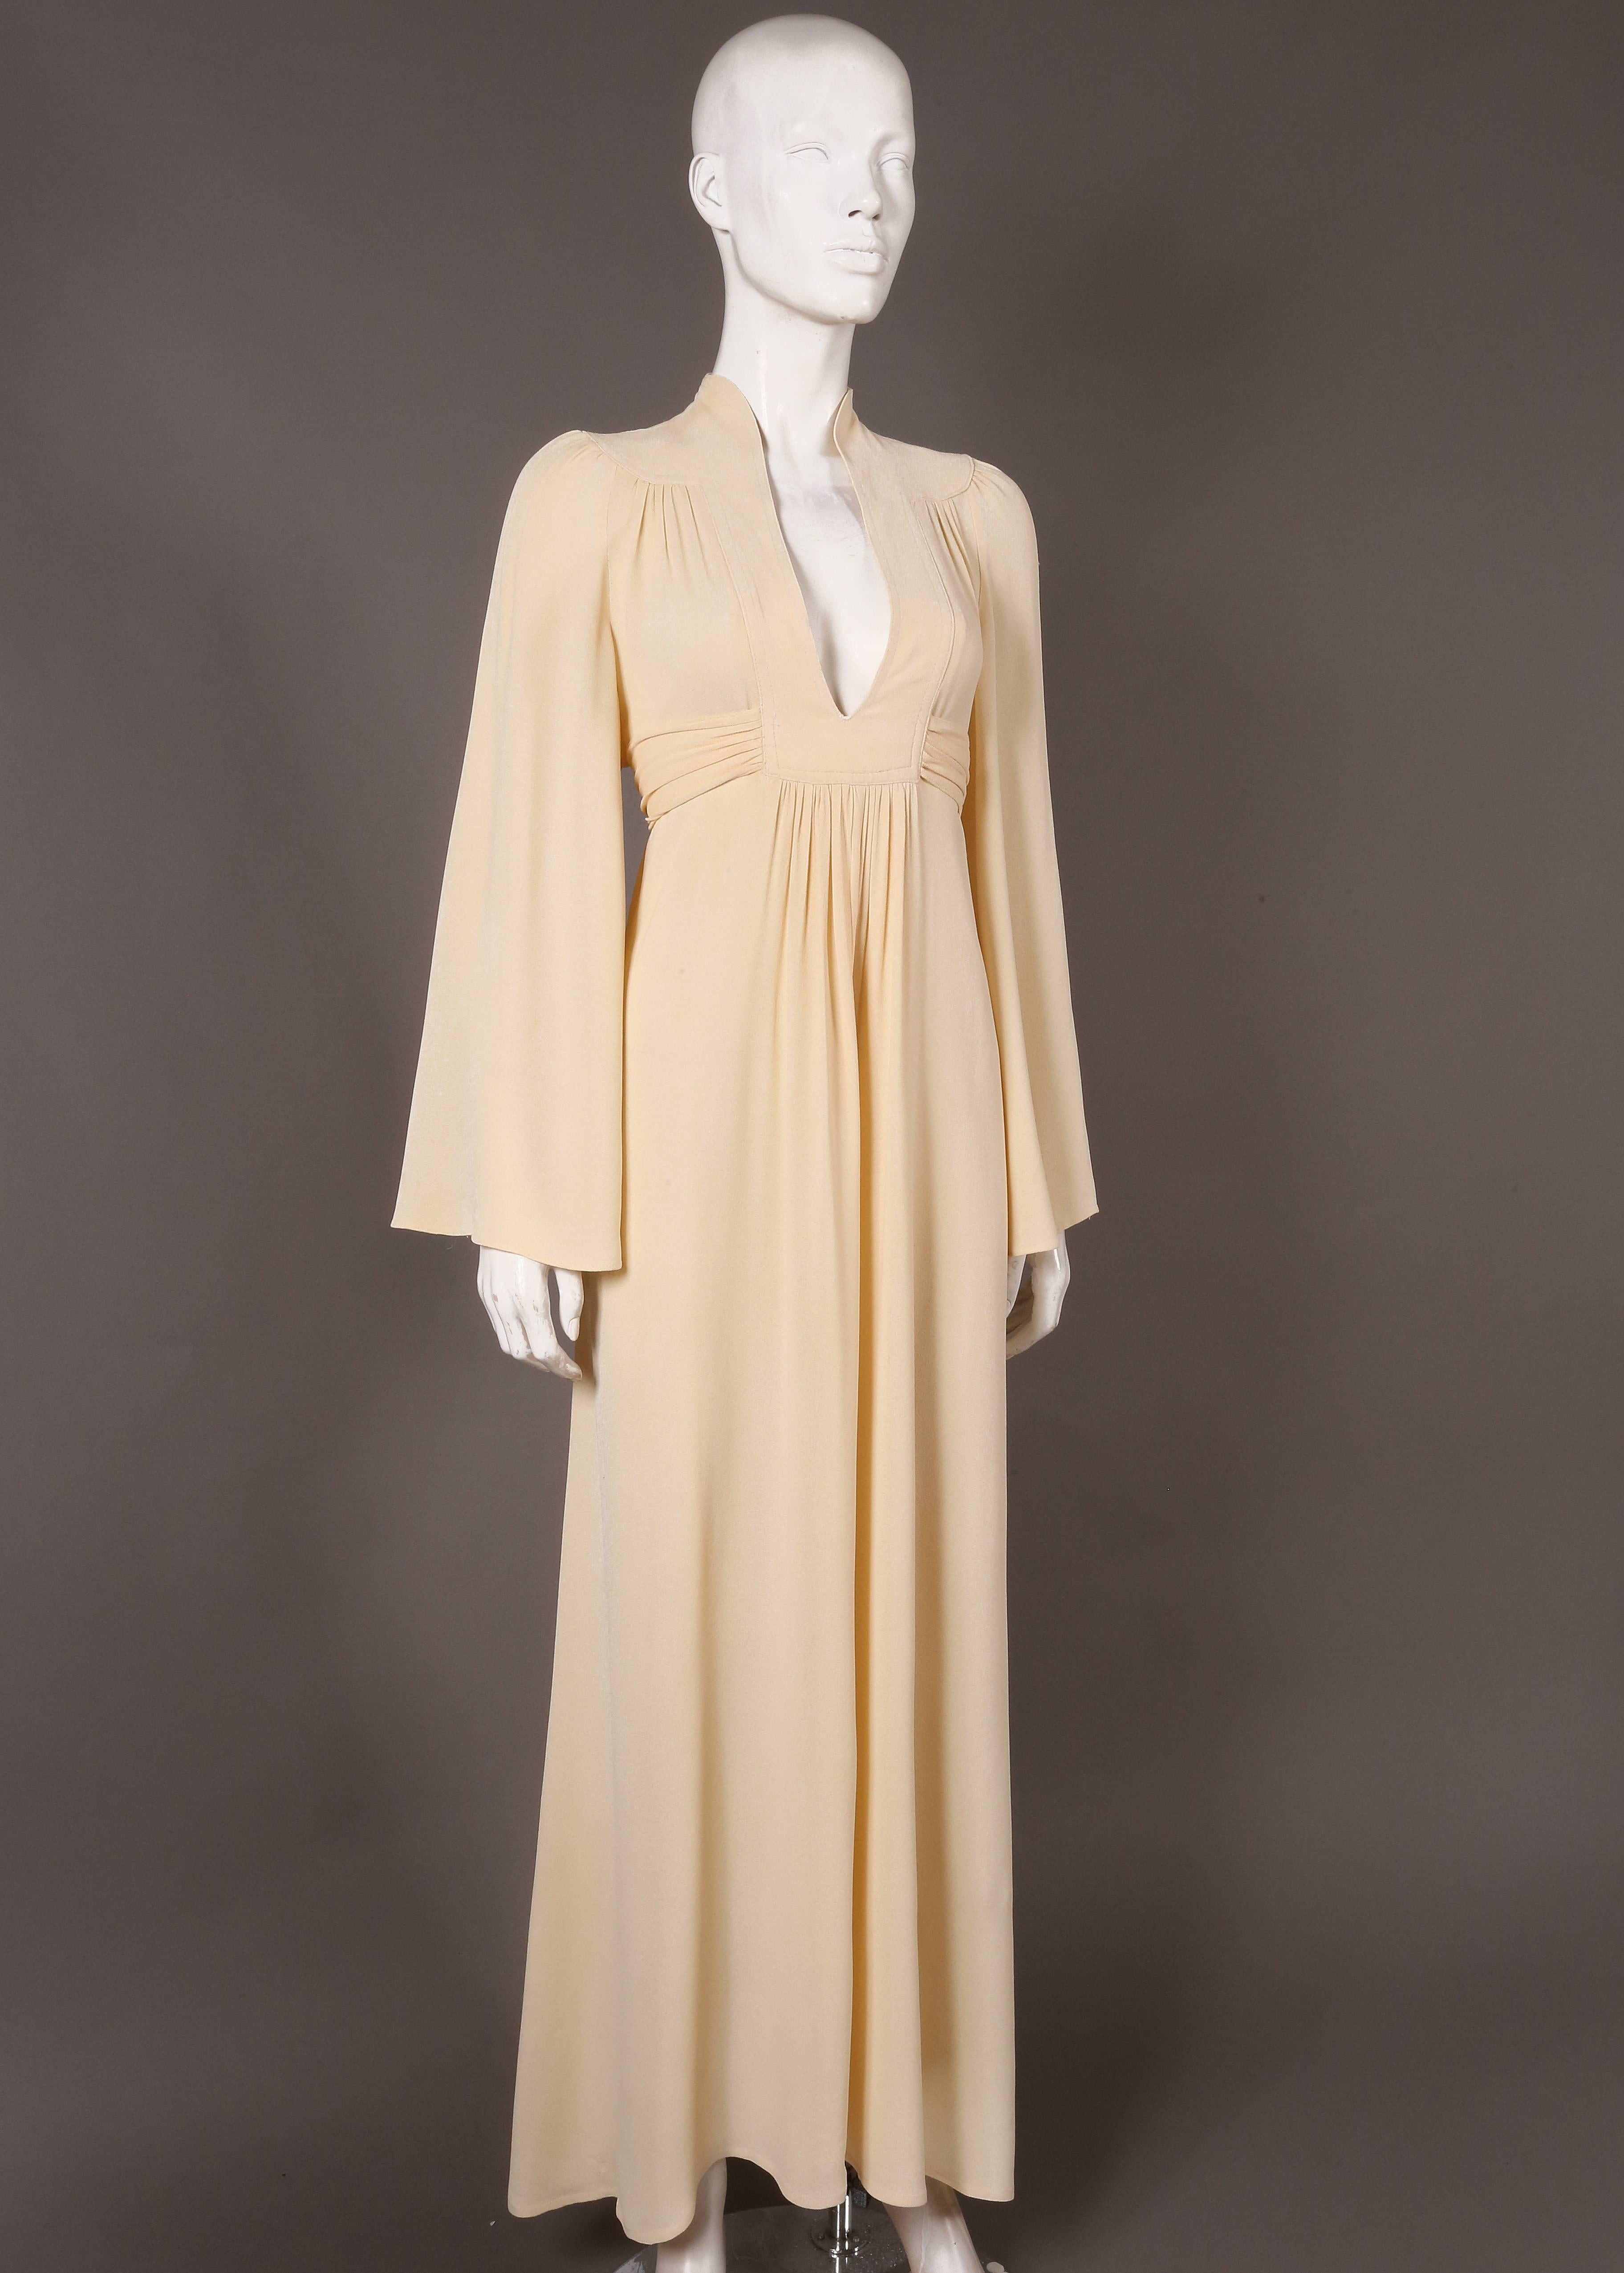 Ossie Clark for Radley cream moss crepe gown, circa 1970s. The dress features low plunge cleavage, bell sleeves, pleating throughout and a waist belt which fastenings at the rear. 

Medium